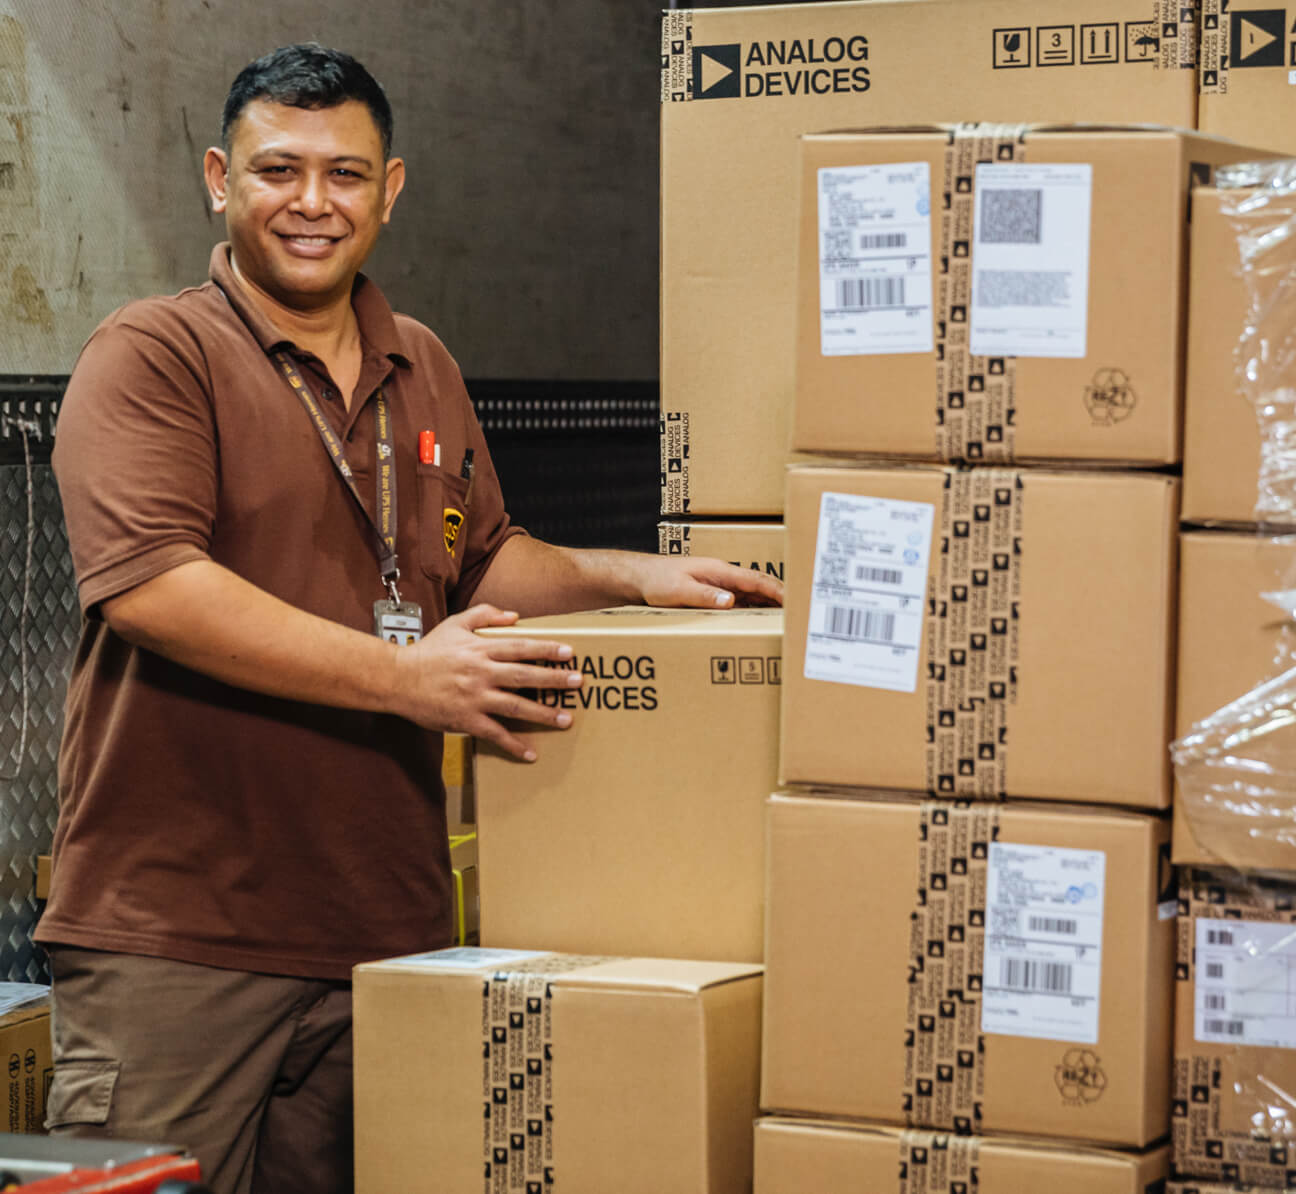 Employee smiling while standing next to a stack of boxes